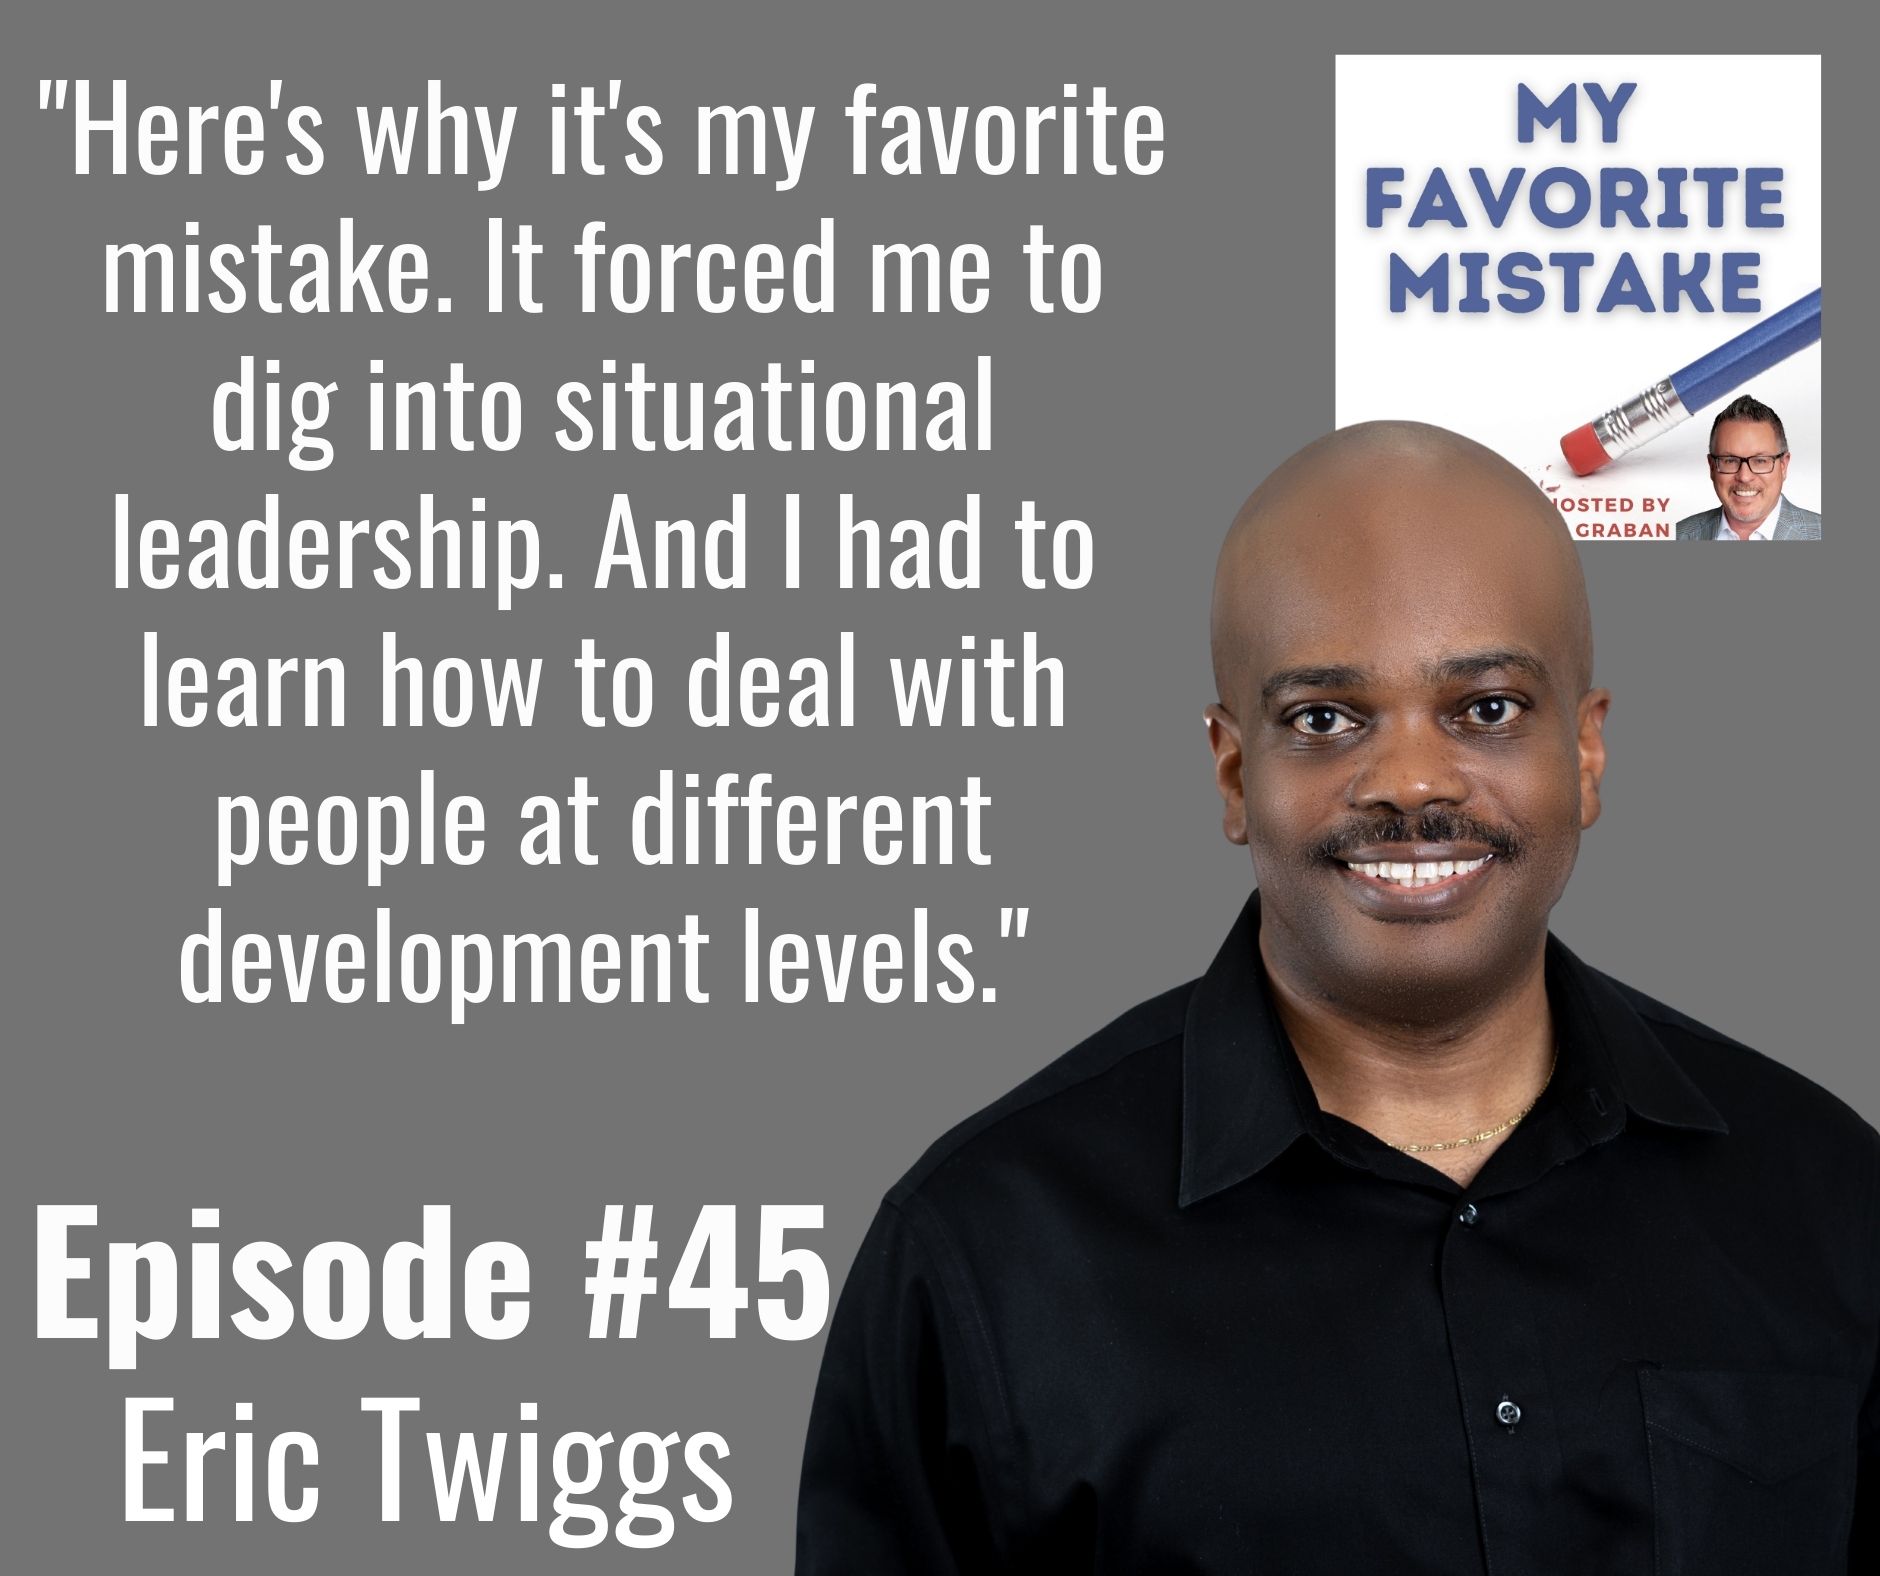 "Here's why it's my favorite mistake. It forced me to dig into situational leadership. And I had to learn how to deal with people at different development levels."